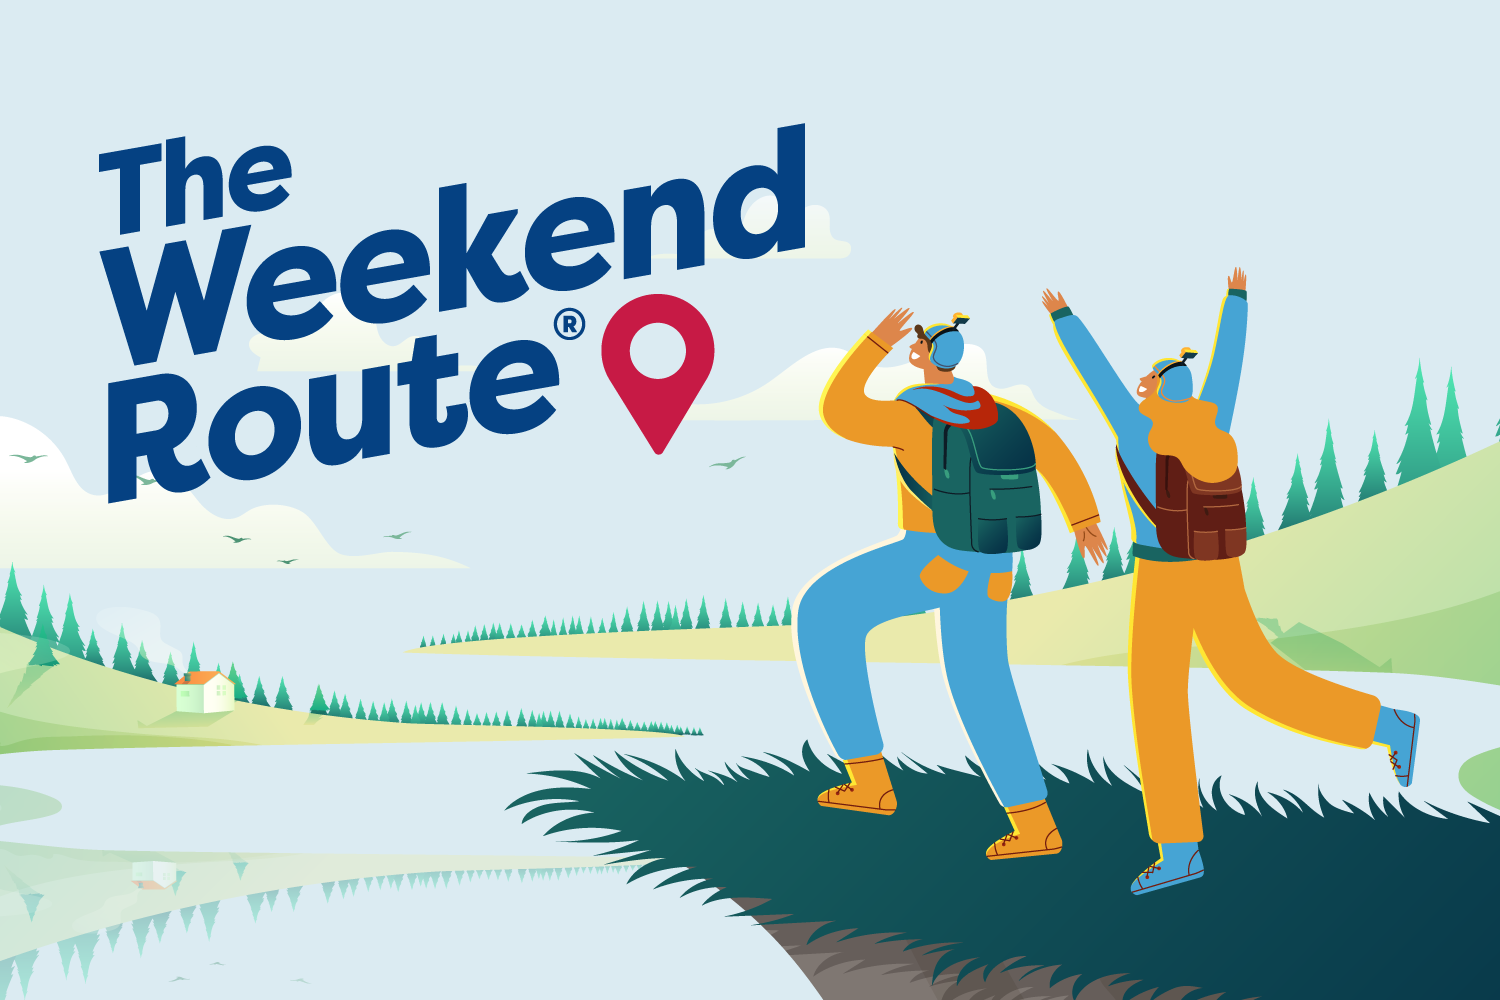 The Weekend Route Logo and an illustration of two people hiking